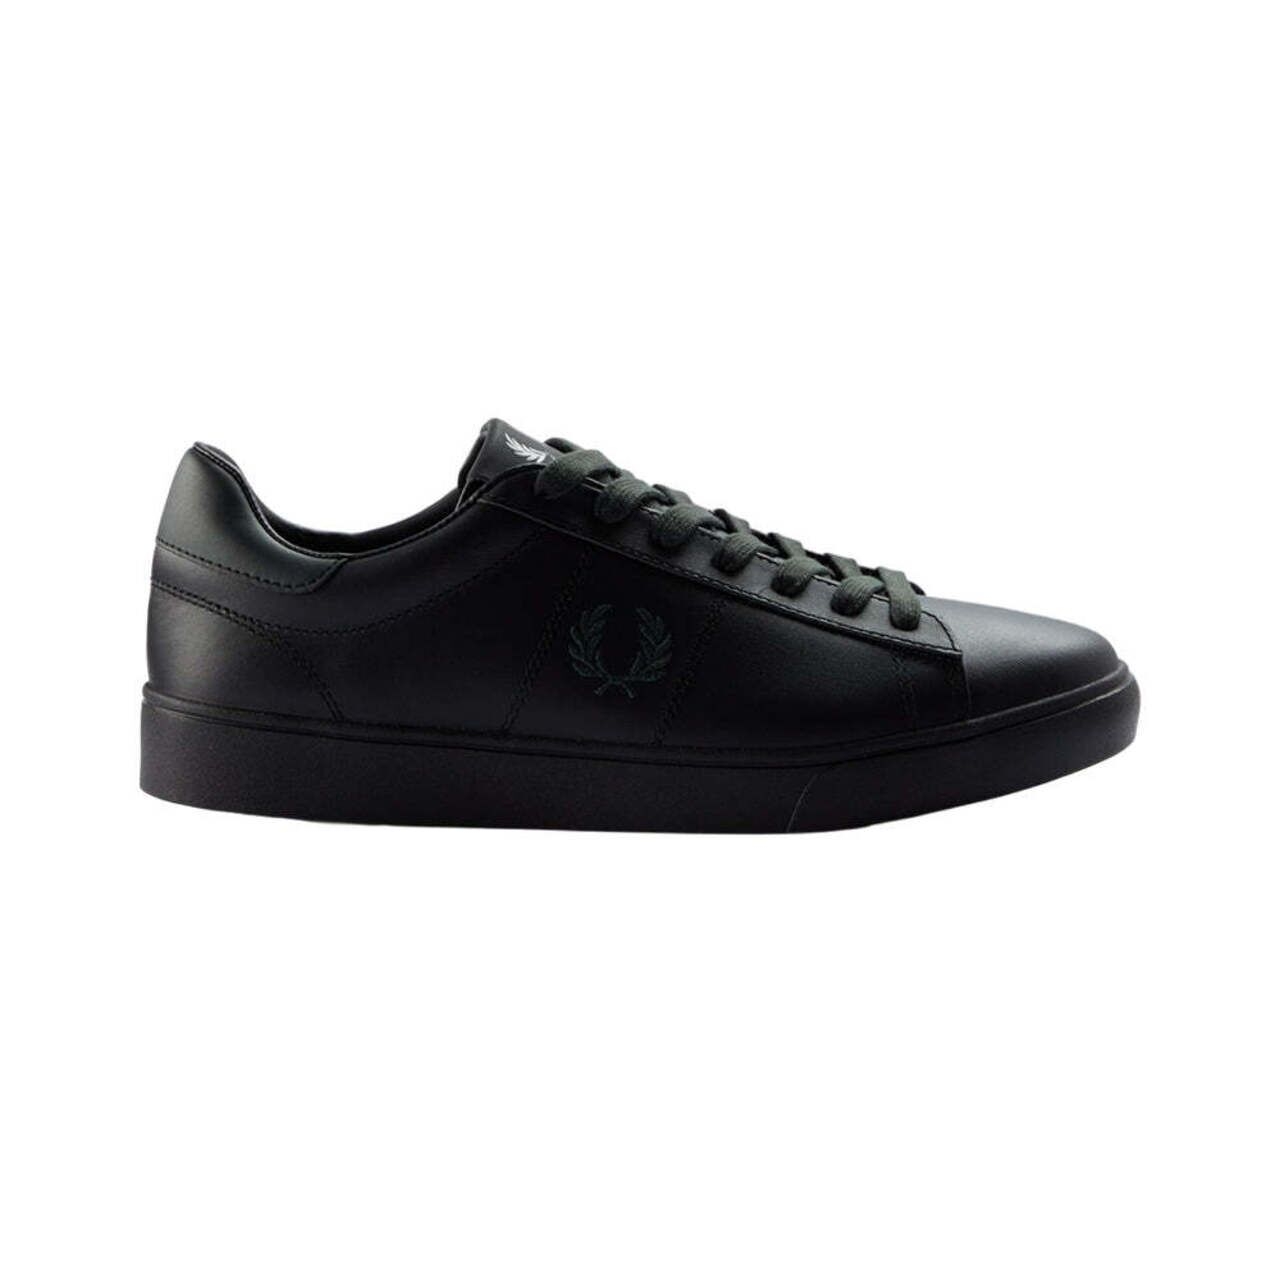 Fred Perry Spancer Tennis Sneakers Black/Night Green